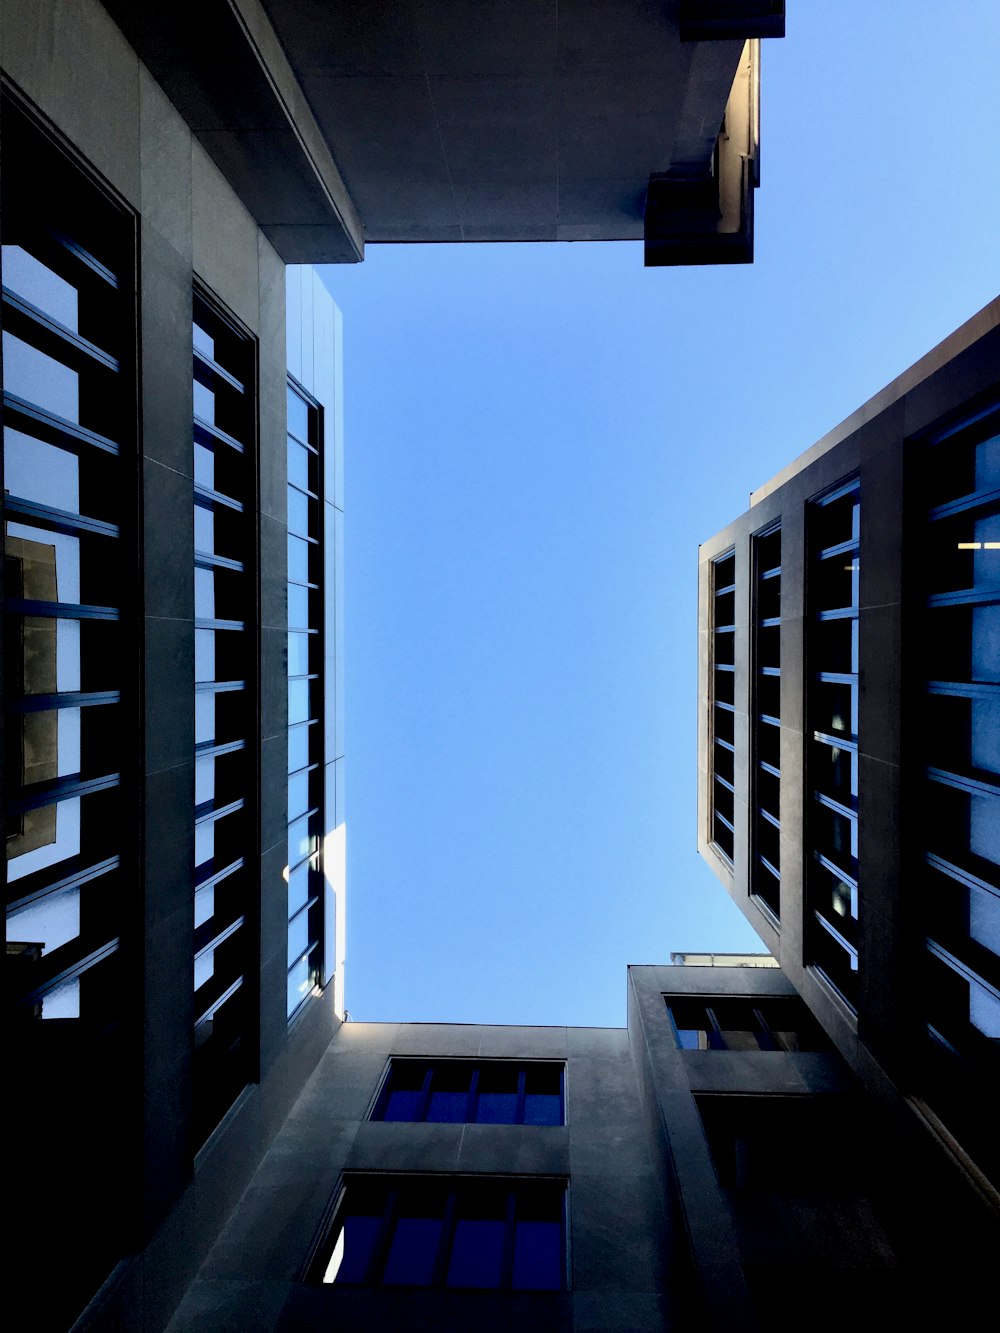 looking up at tall buildings